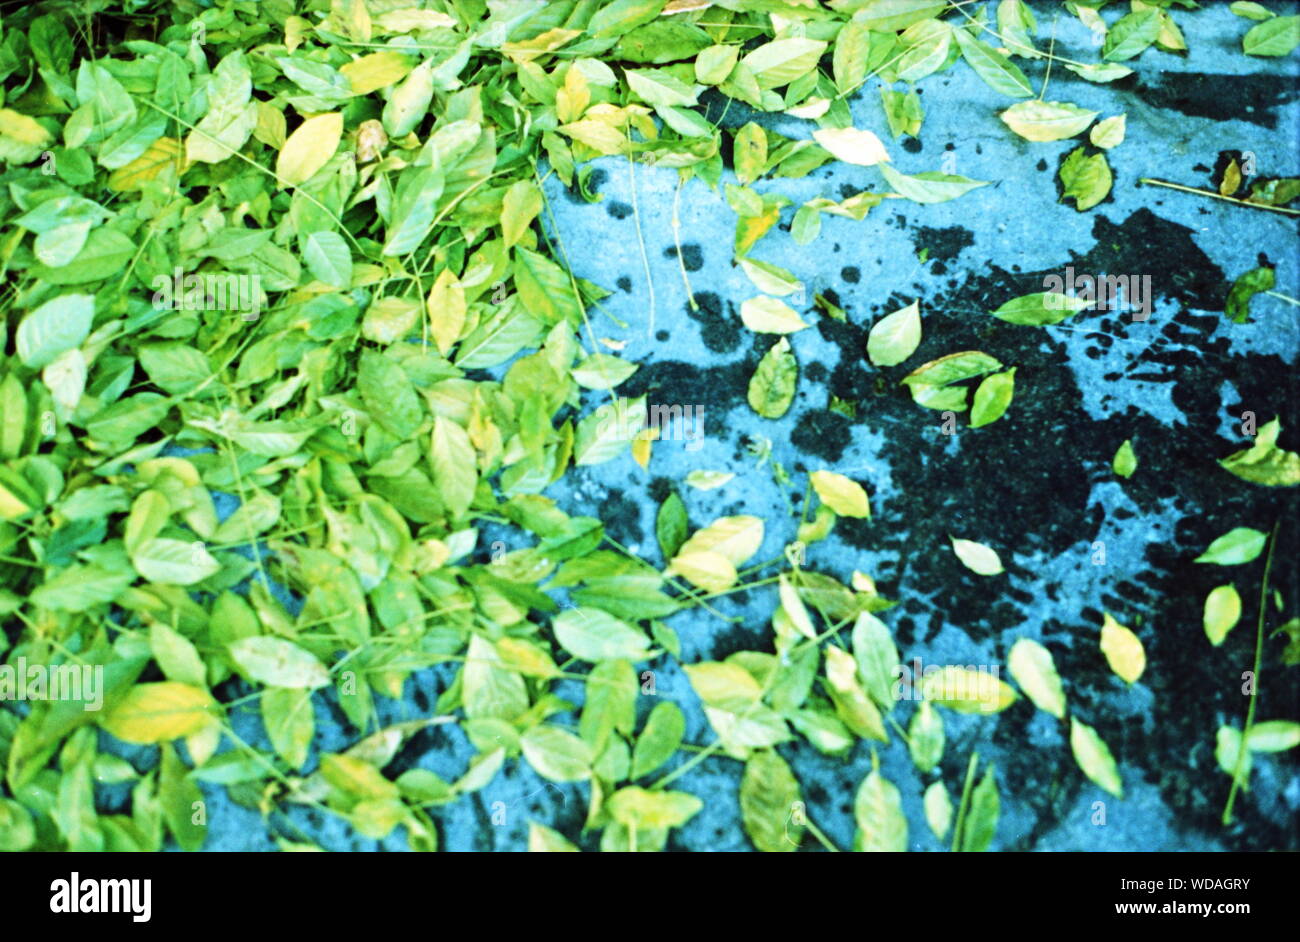 Green Leaves Scattered On A Bluish Surface Stock Photo